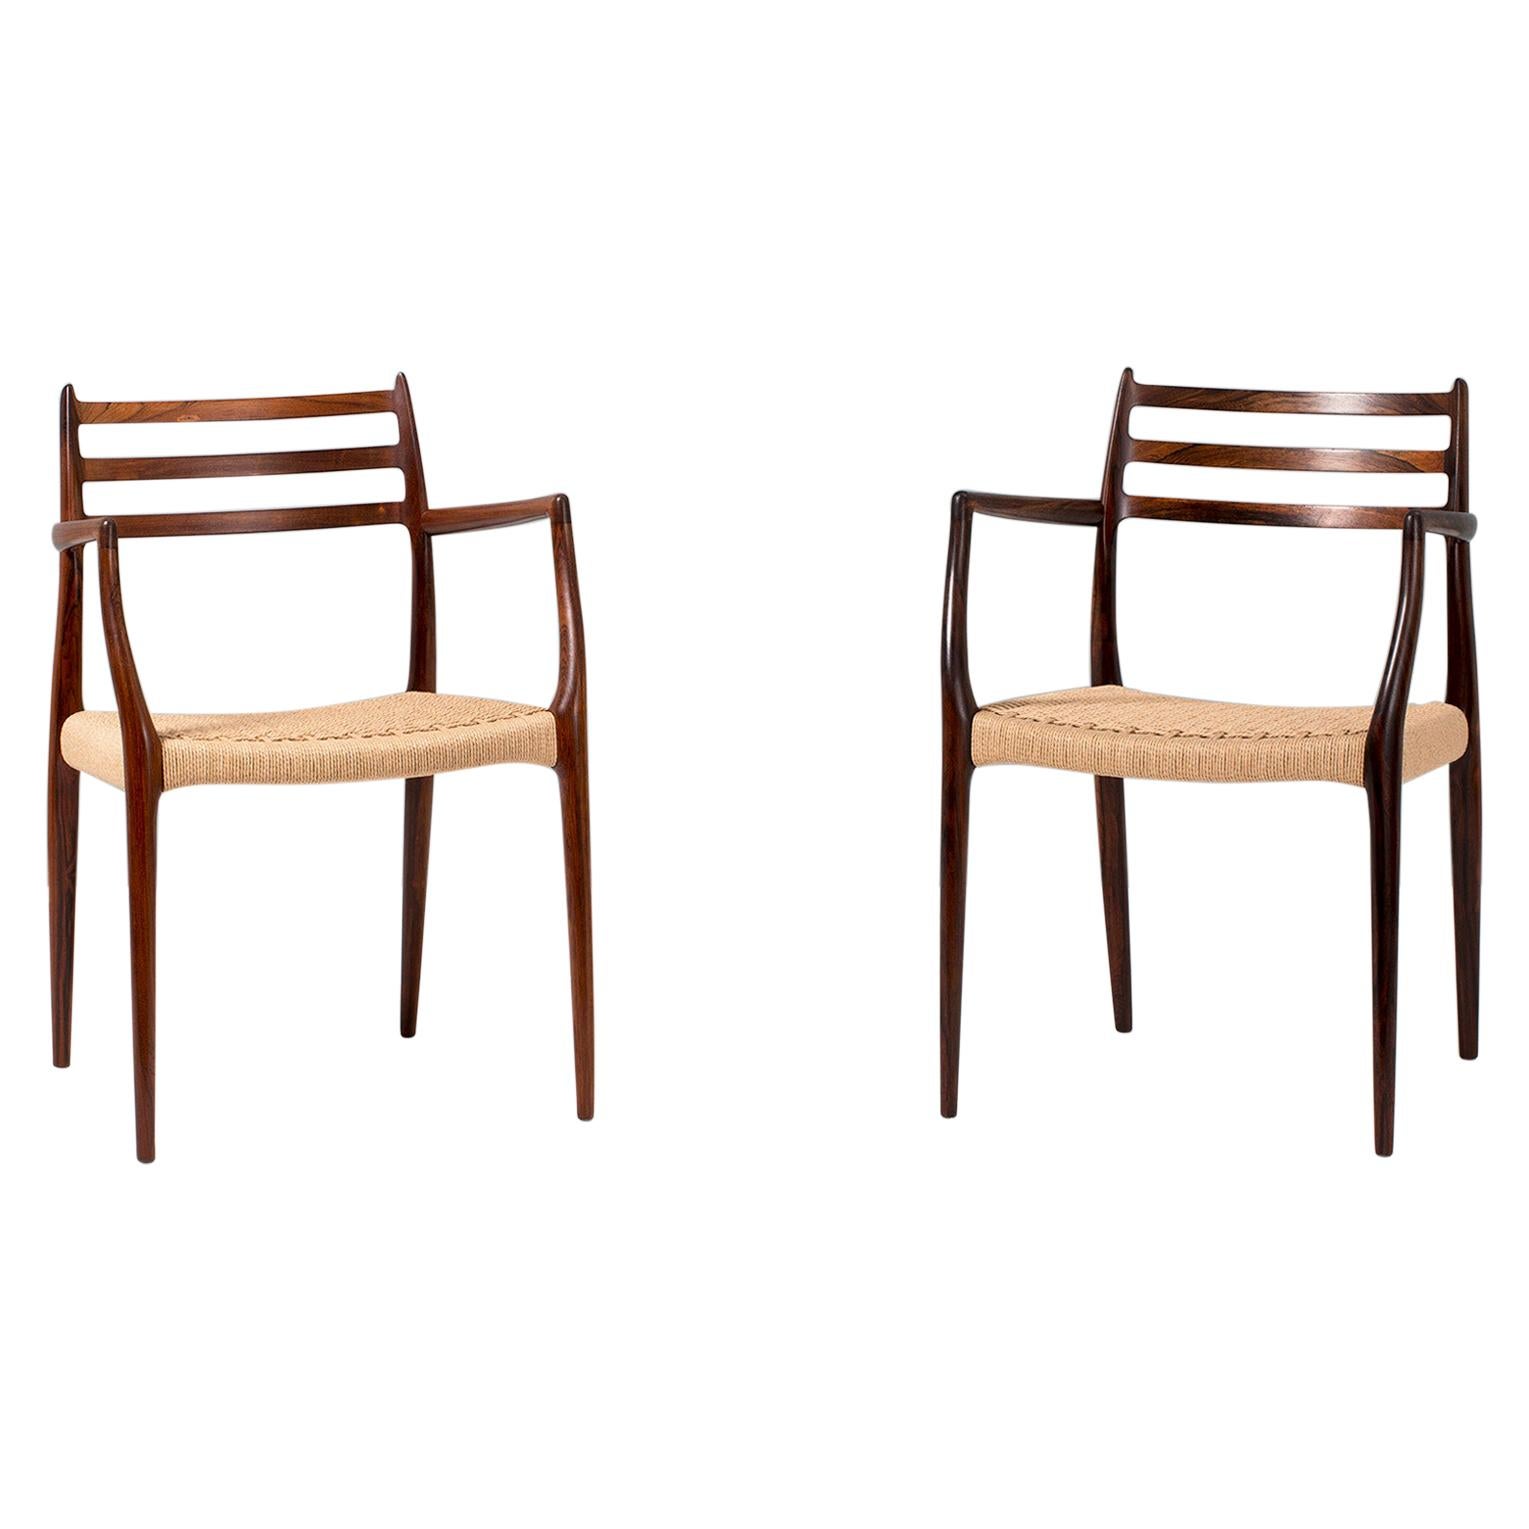 Pair of Brazilian Rosewood Model 62 Armchairs by Niels Moller, 1962